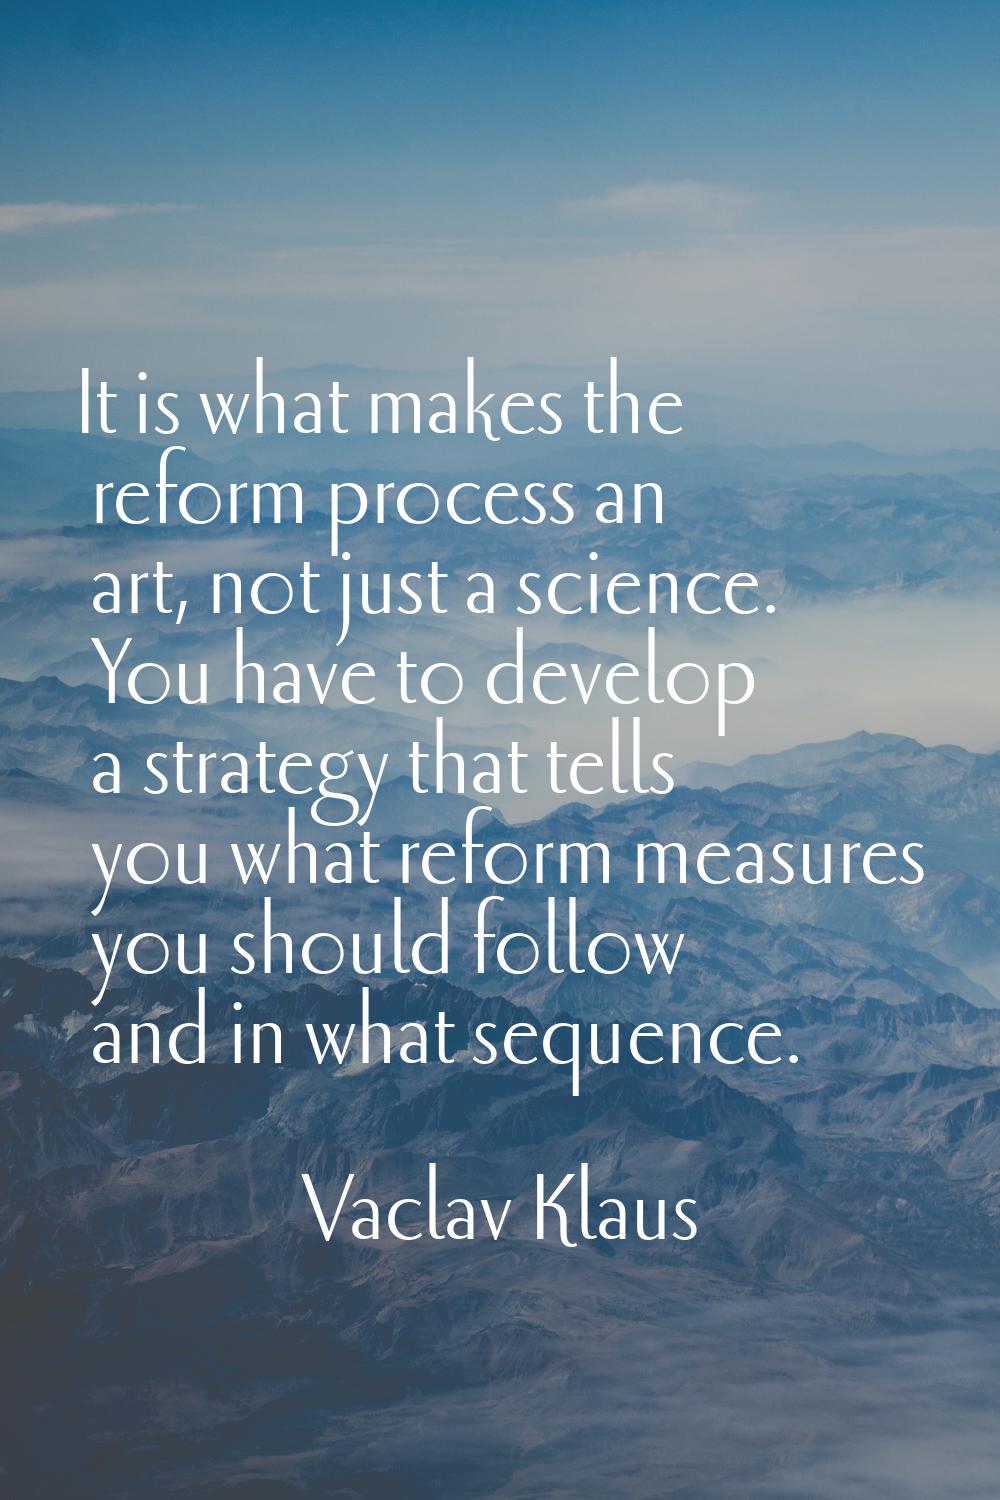 It is what makes the reform process an art, not just a science. You have to develop a strategy that